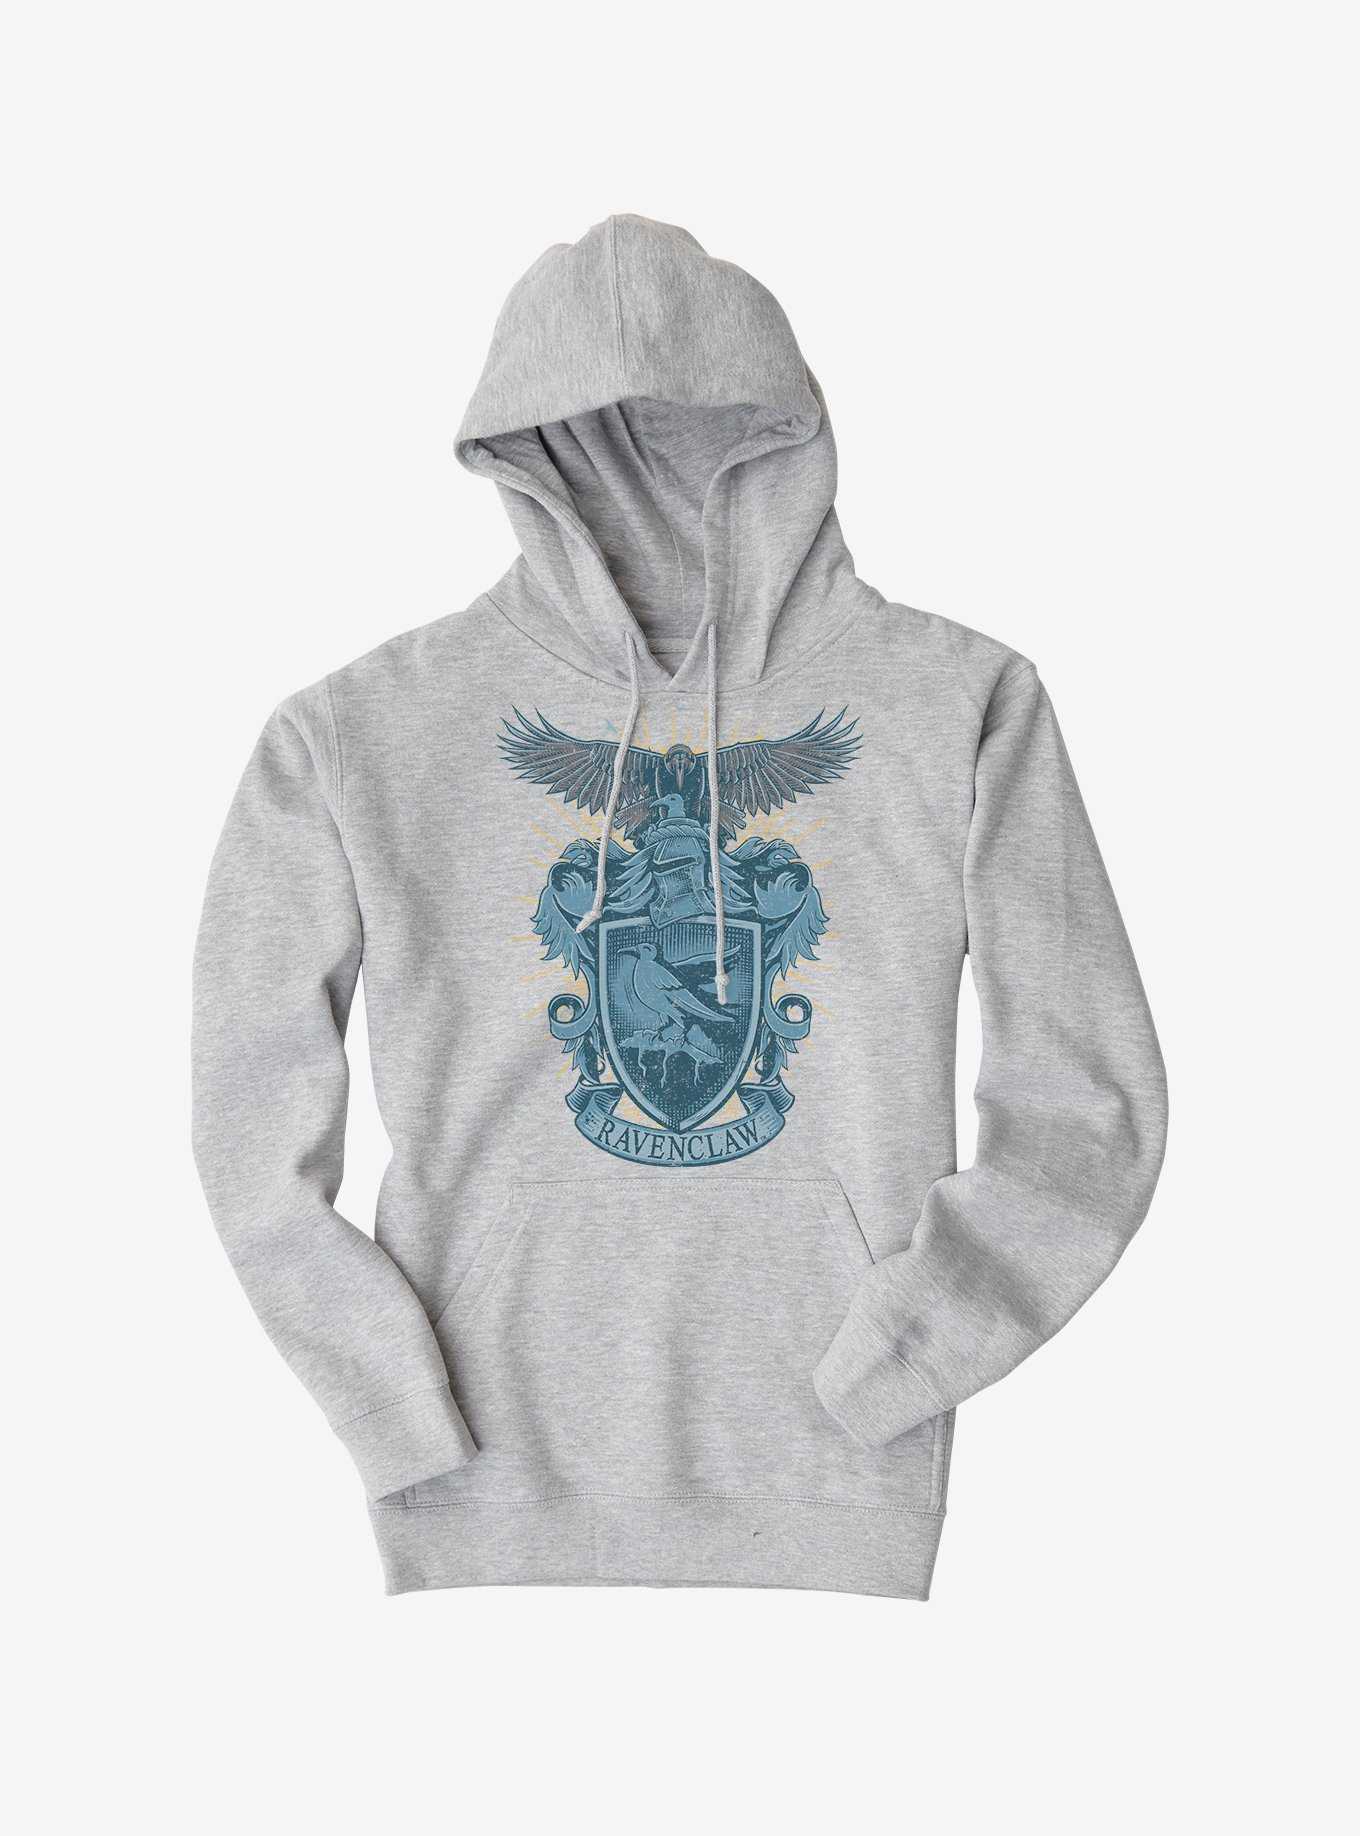 OFFICIAL Ravenclaw Hoodies & Sweaters | Hot Topic